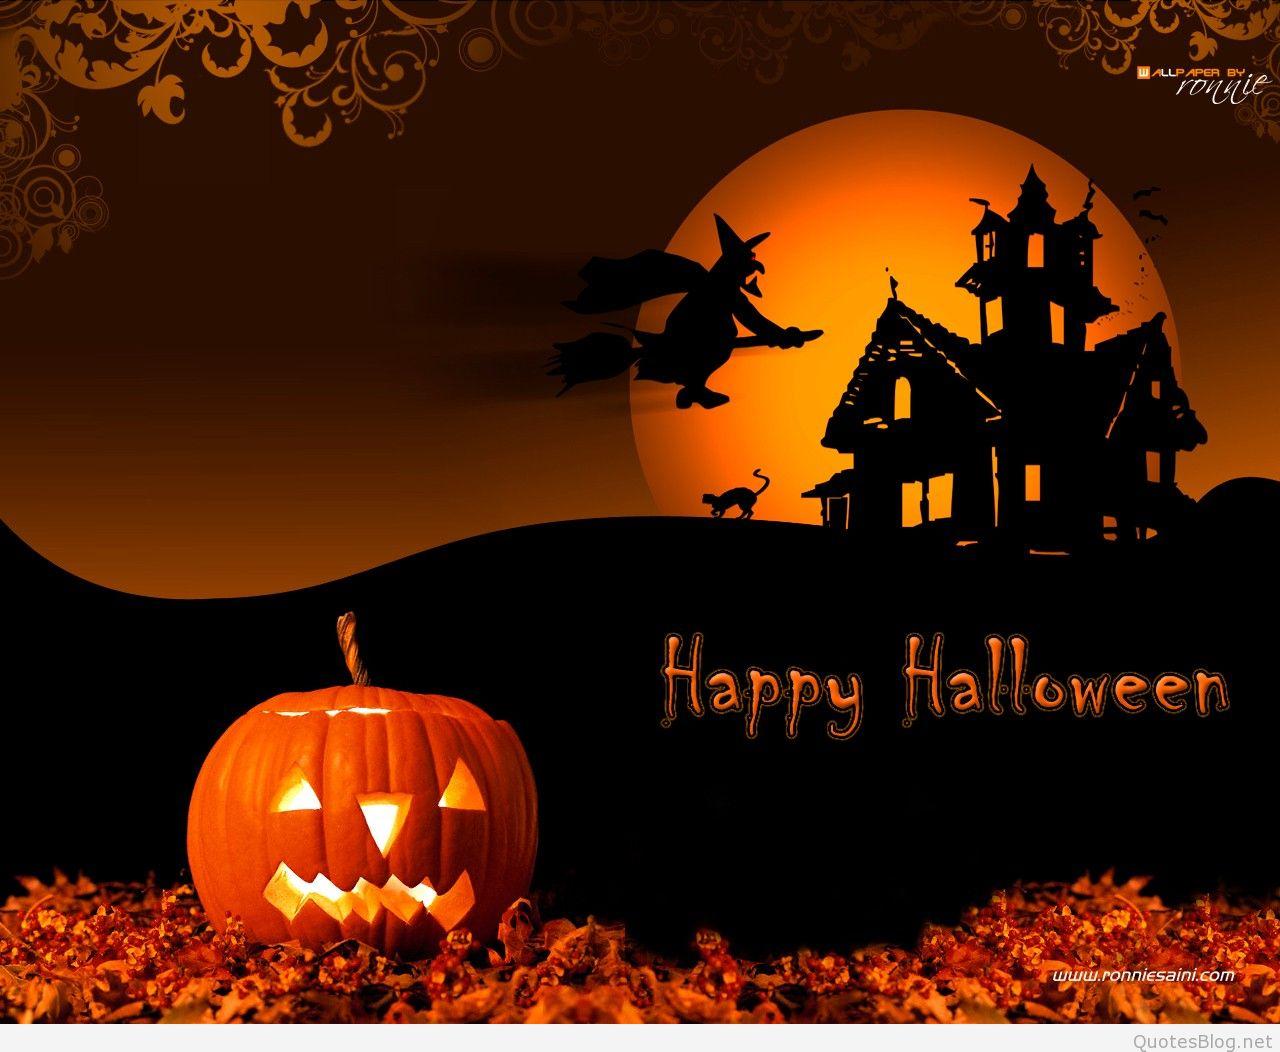 Cute free Halloween picture, photo wallpaper 2015 2016